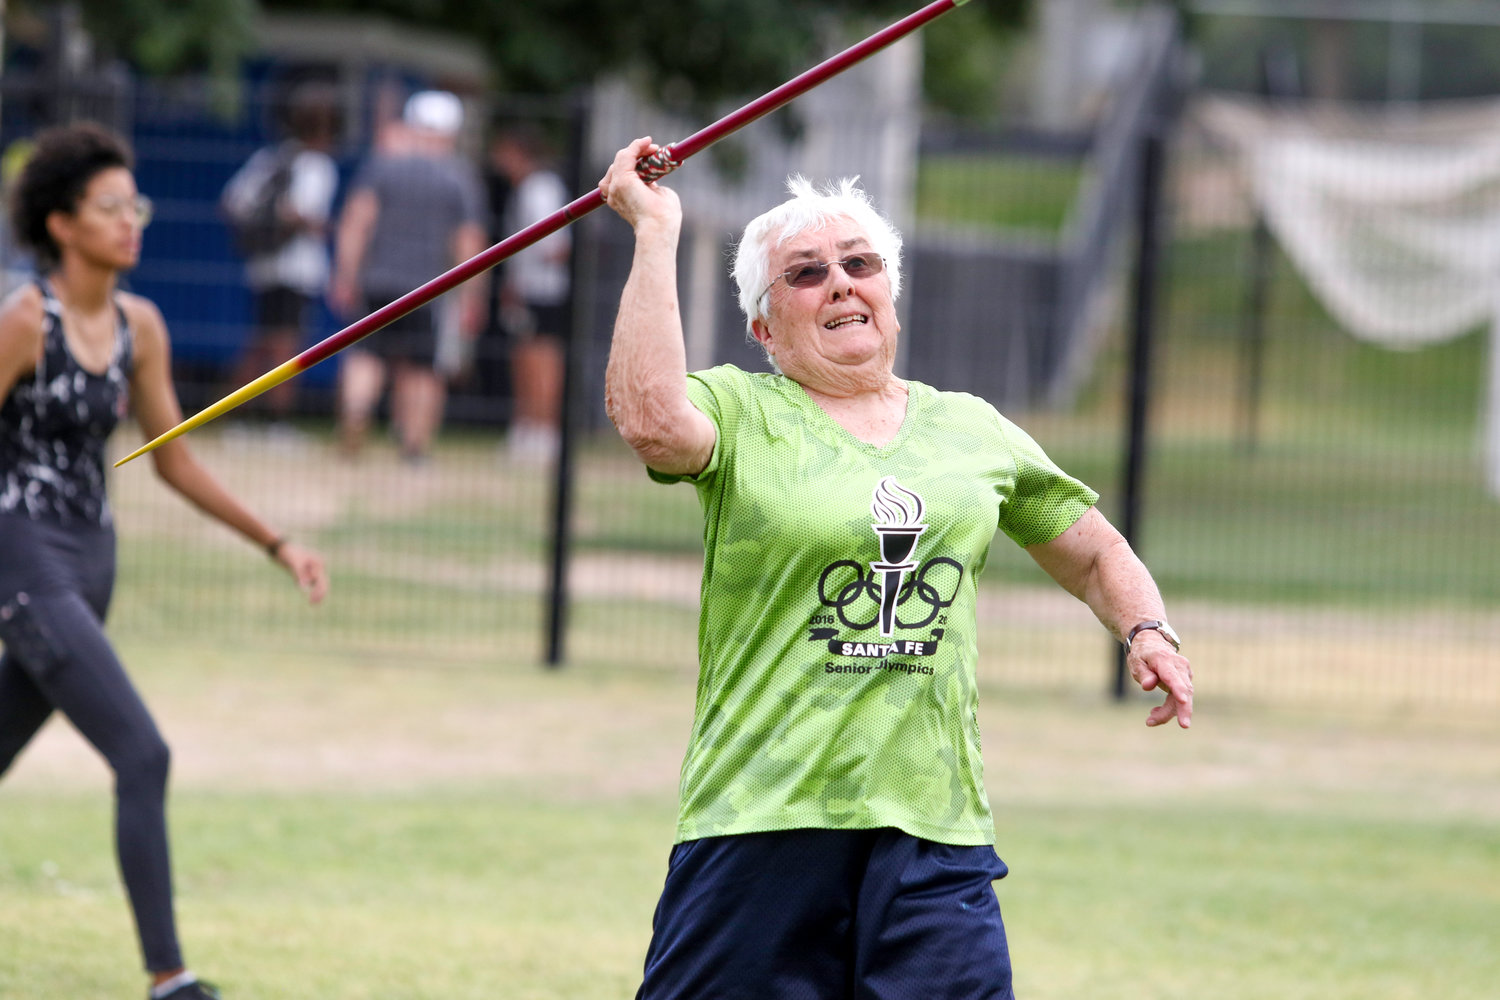 Barbara Hutchison throws the javelin as she earns first place in the 85-89 age group.